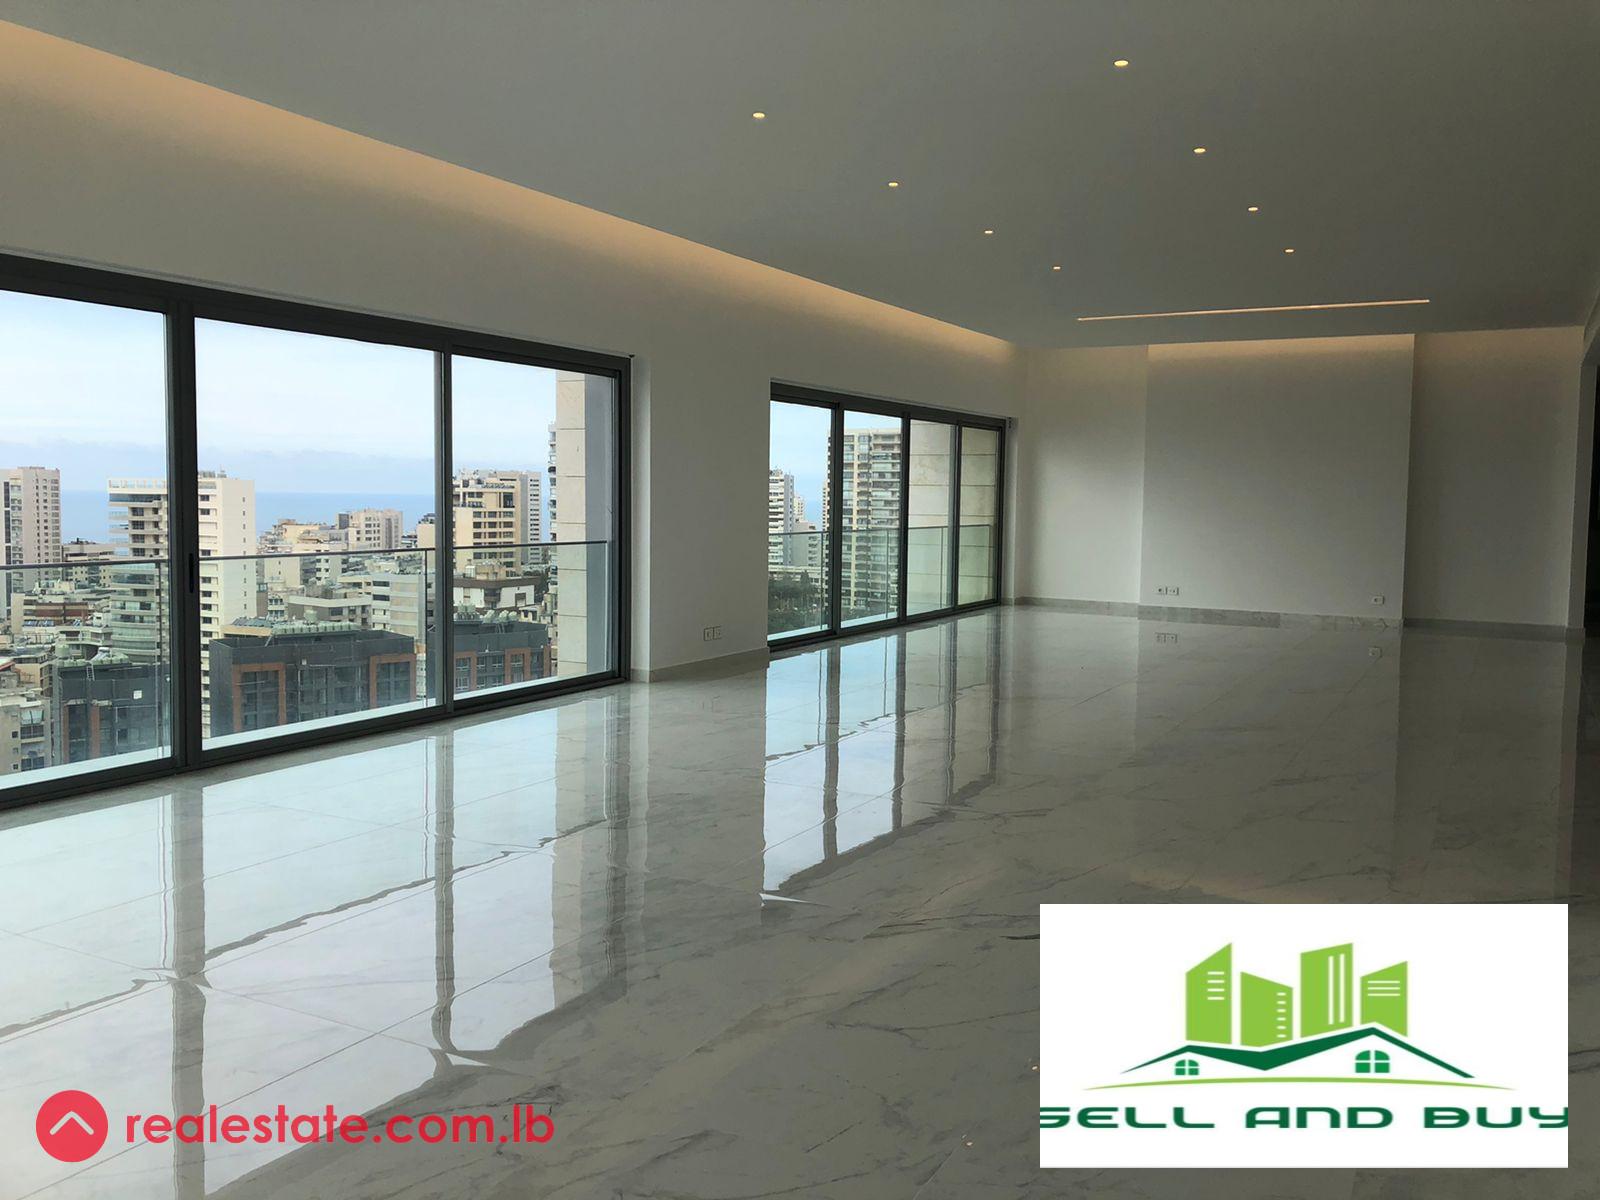 Ein teeneh: 1030m apartment for sale